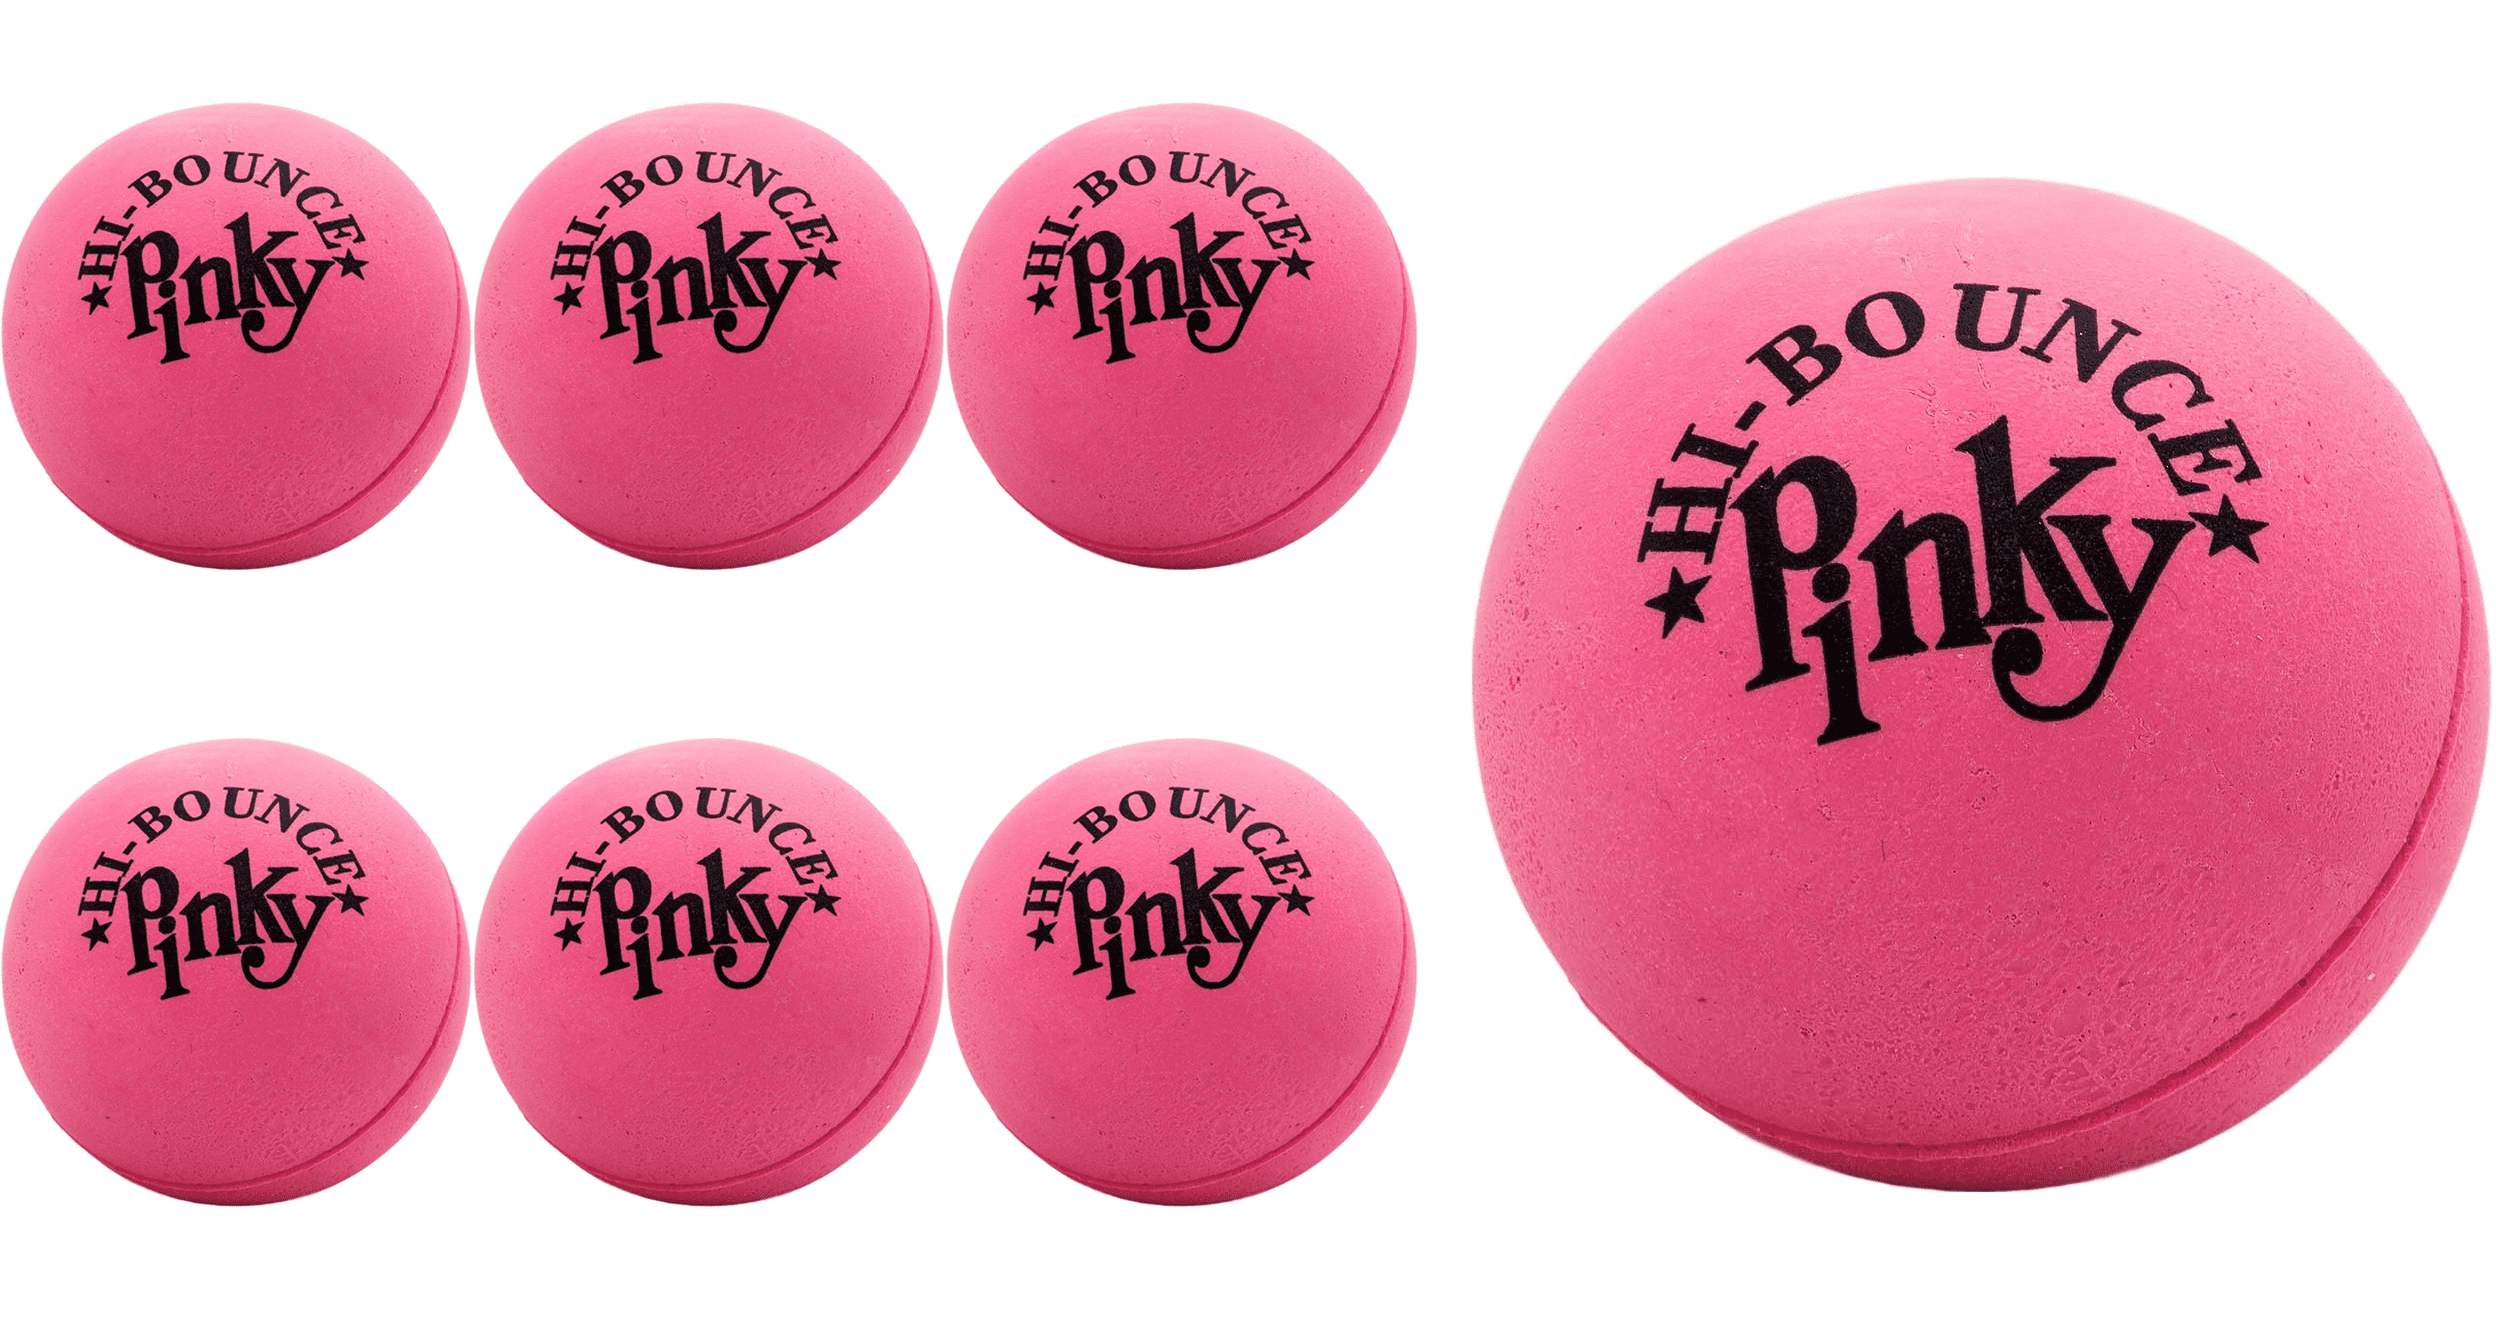 Pinky Ball Pack of 6 2.5" Hi Bounce Large Pink Rubber Balls for Play or Massag 